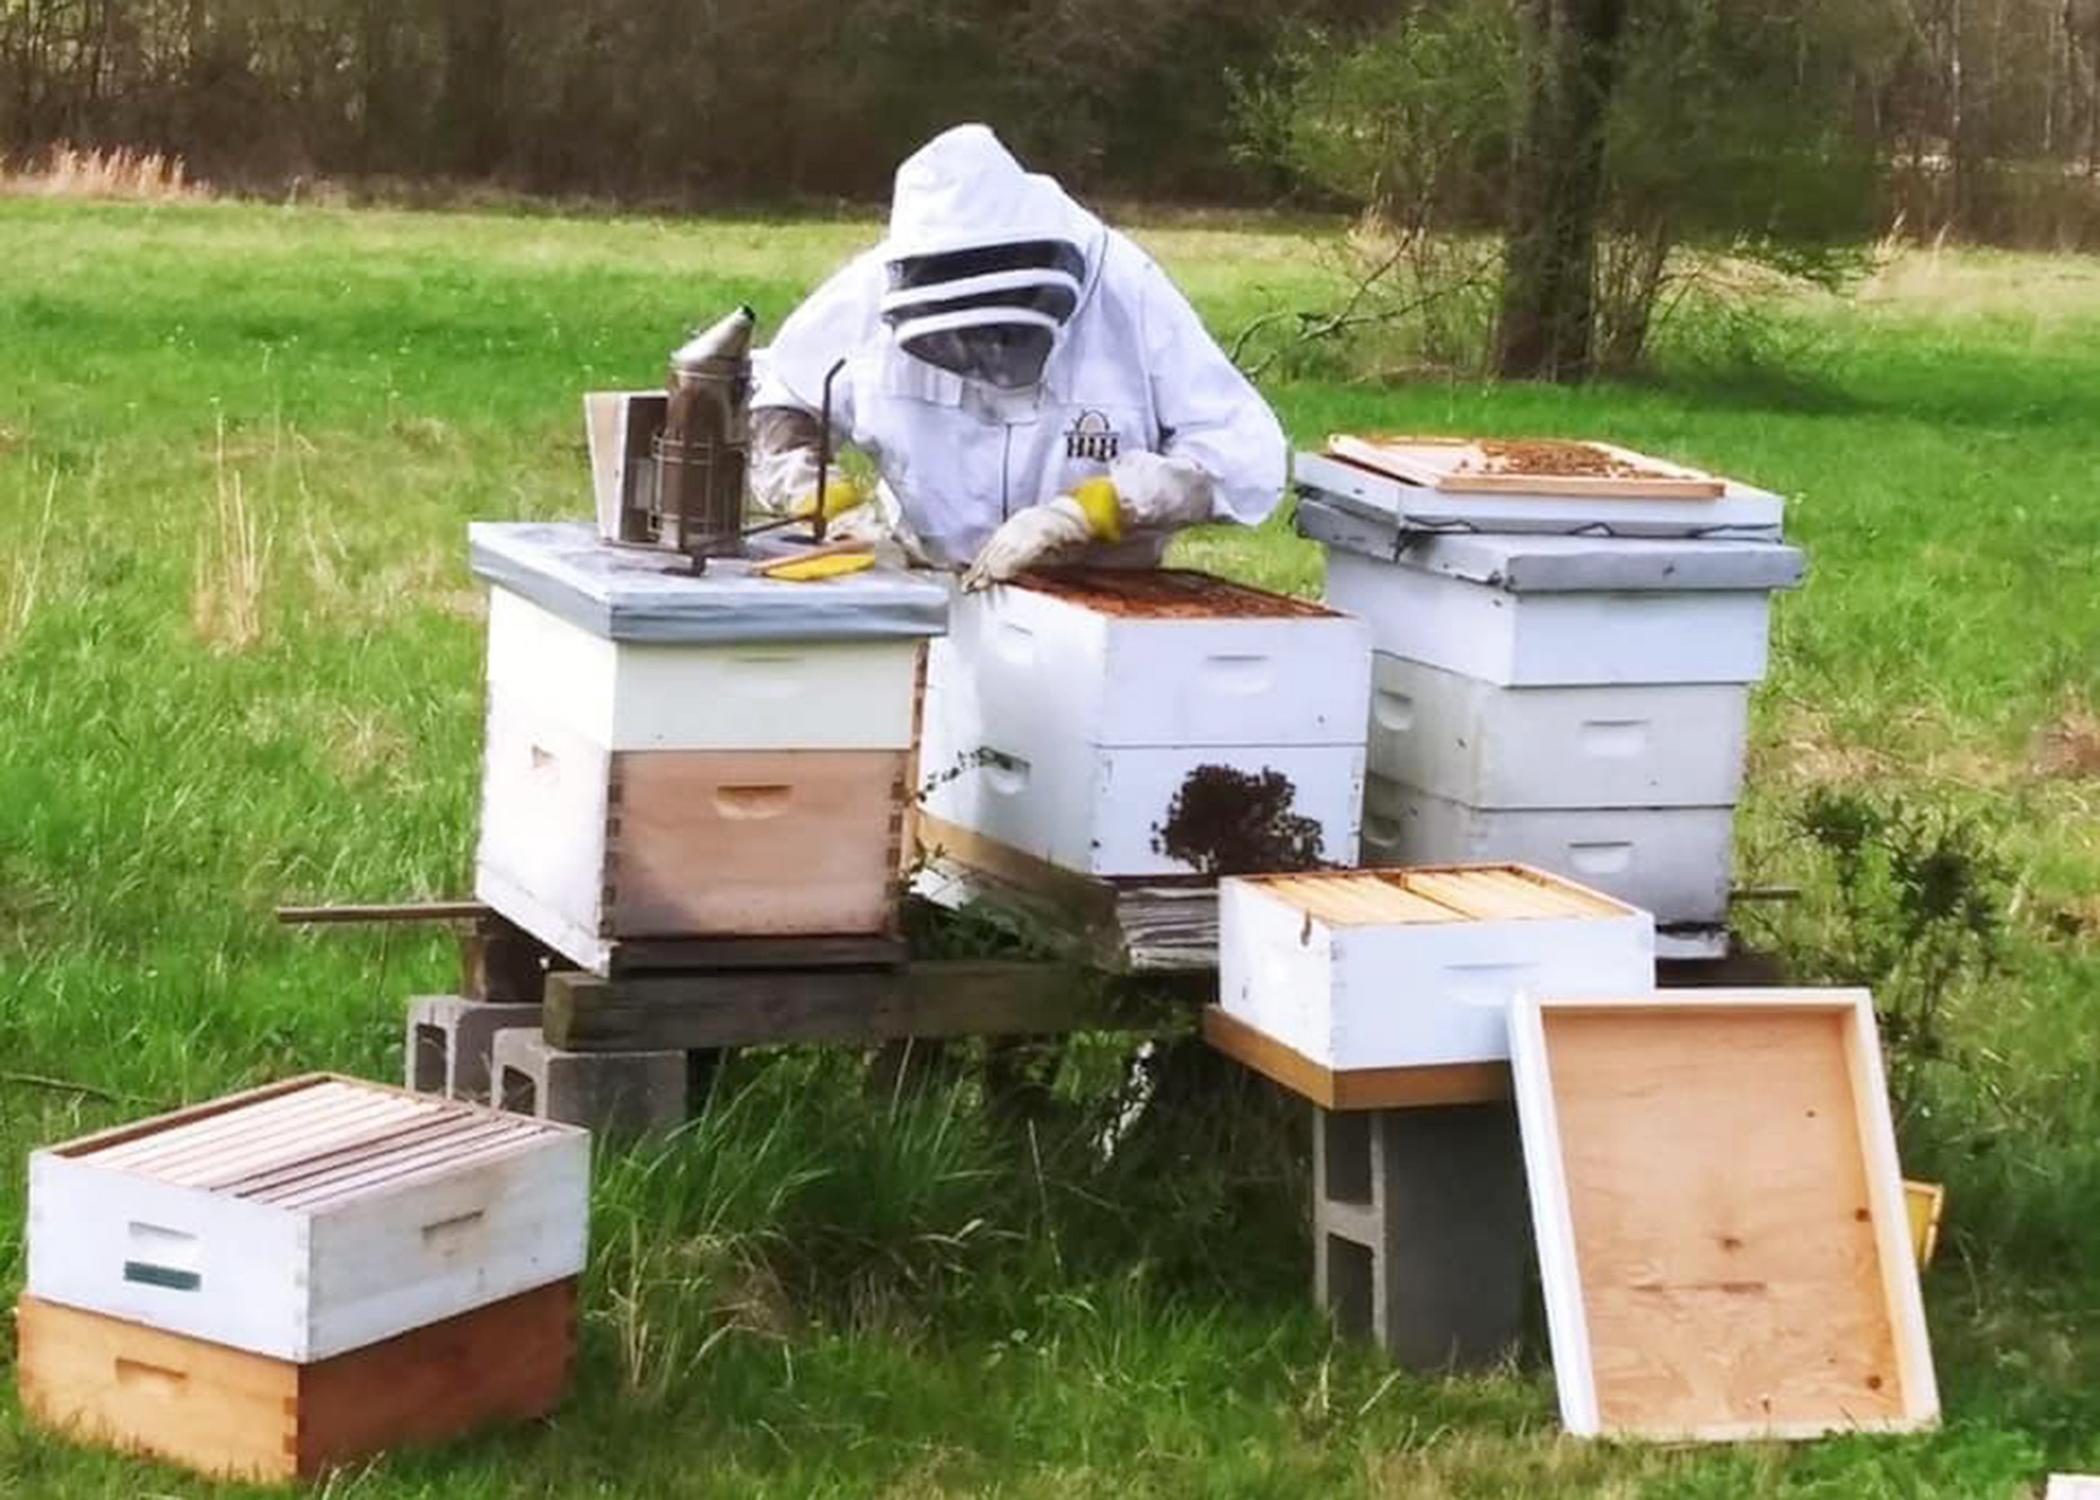 A person works a beehive.